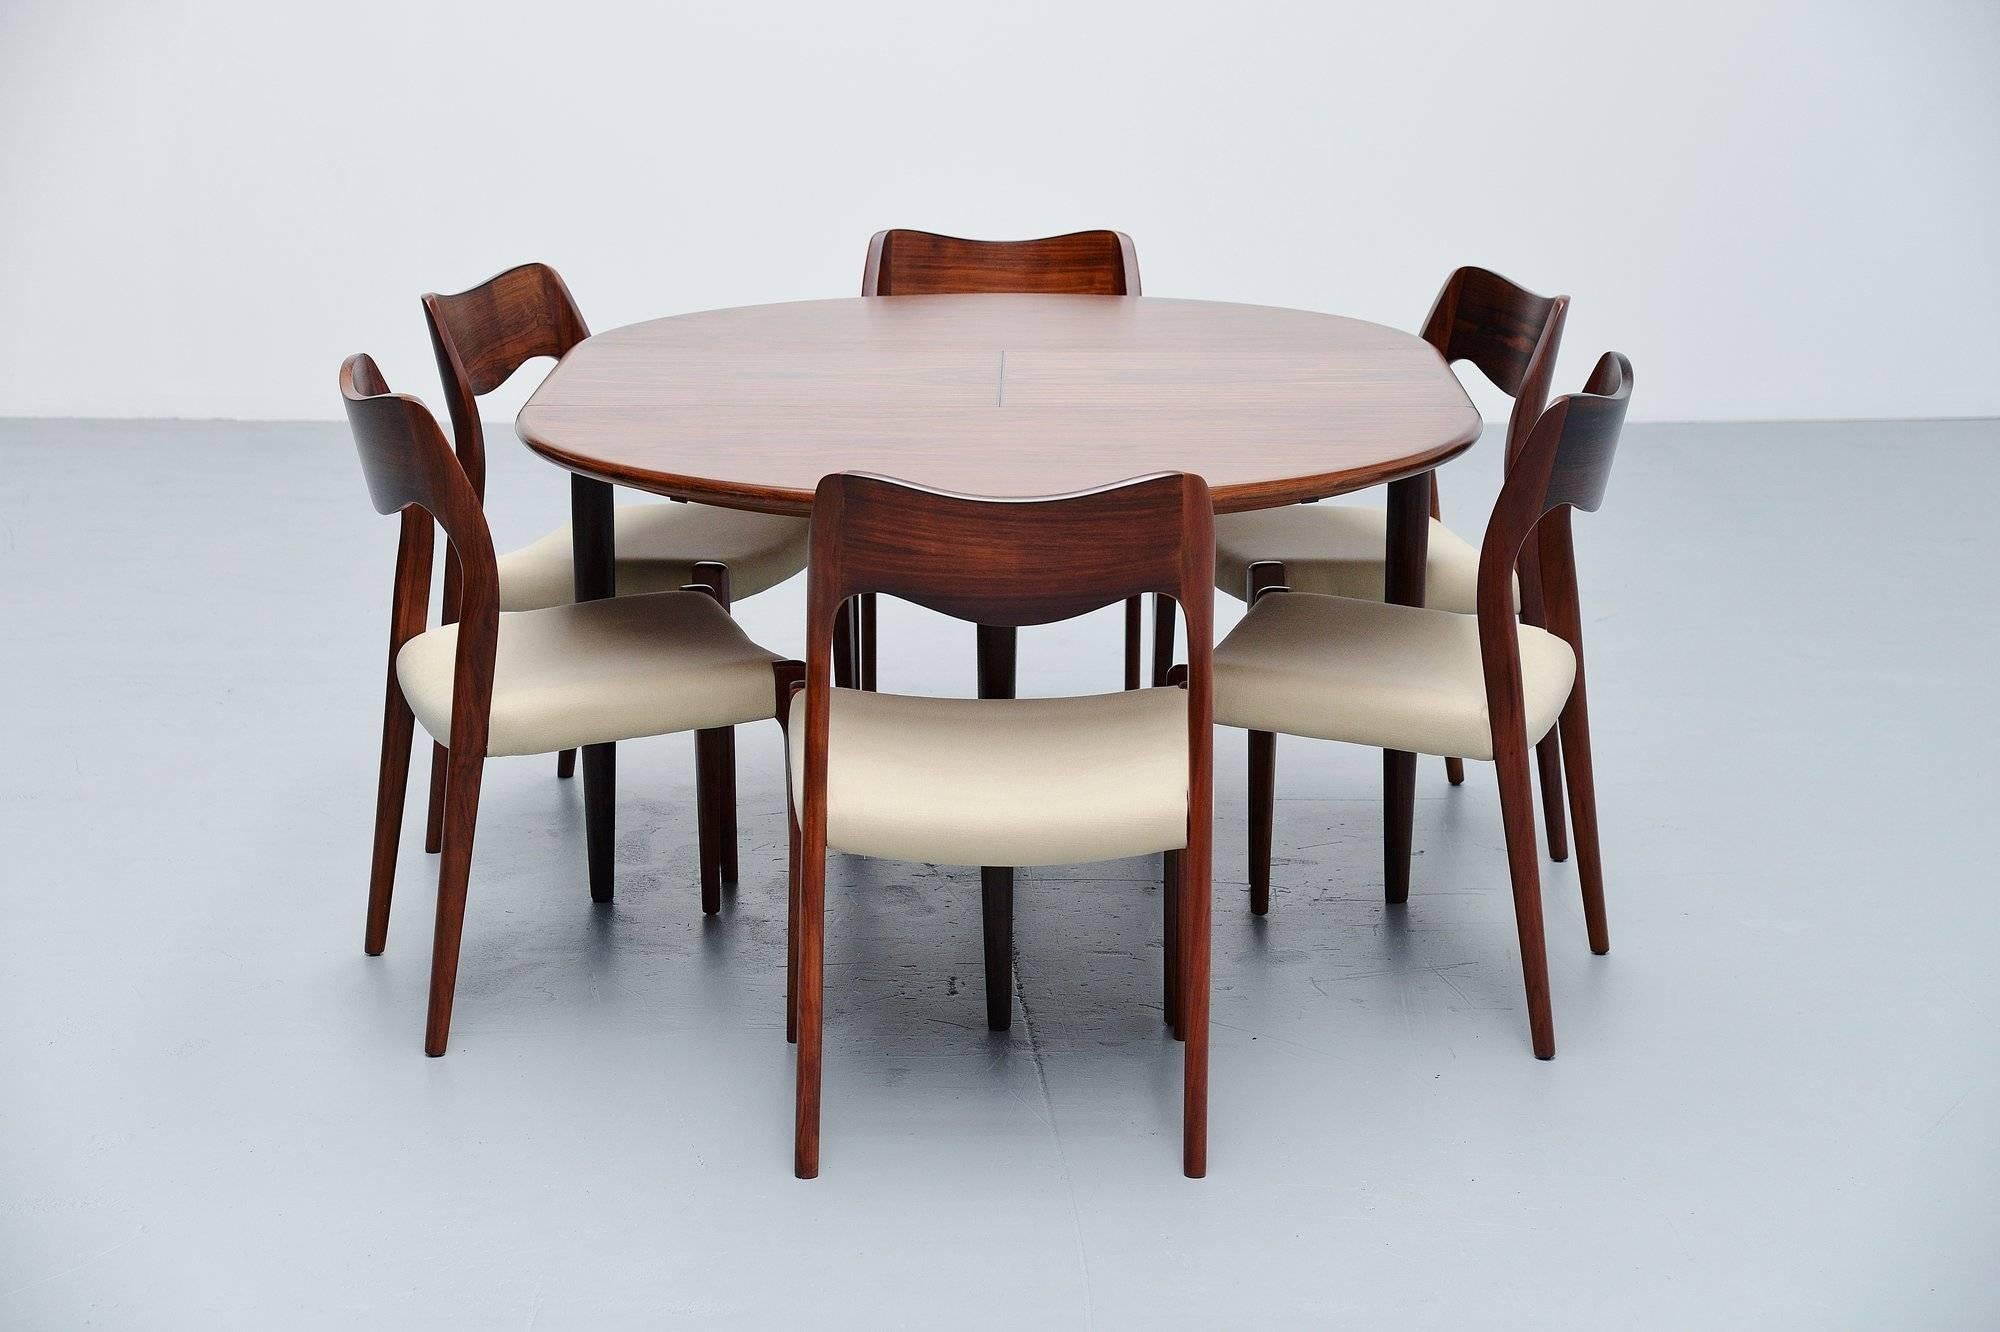 Highly refined extendable dining table designed by Niels Otto Moller, manufactured by J.L. Møller Mobelfabrik, Denmark, 1960. This table is made of high quality rosewood and has a nice warm grain to the wood. The table is 123 cm round but can be